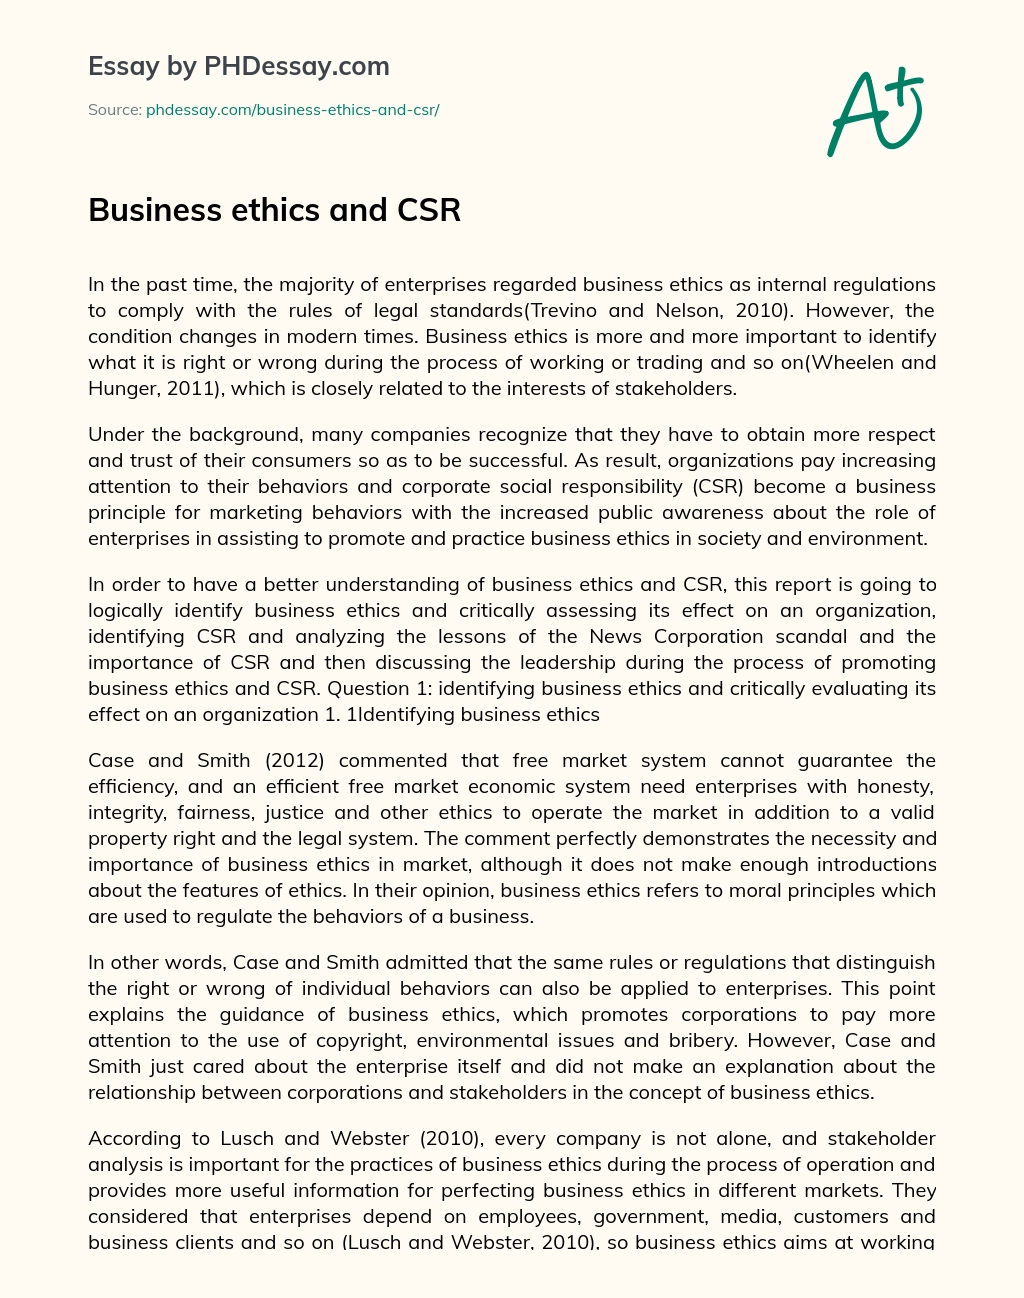 Business ethics and CSR essay